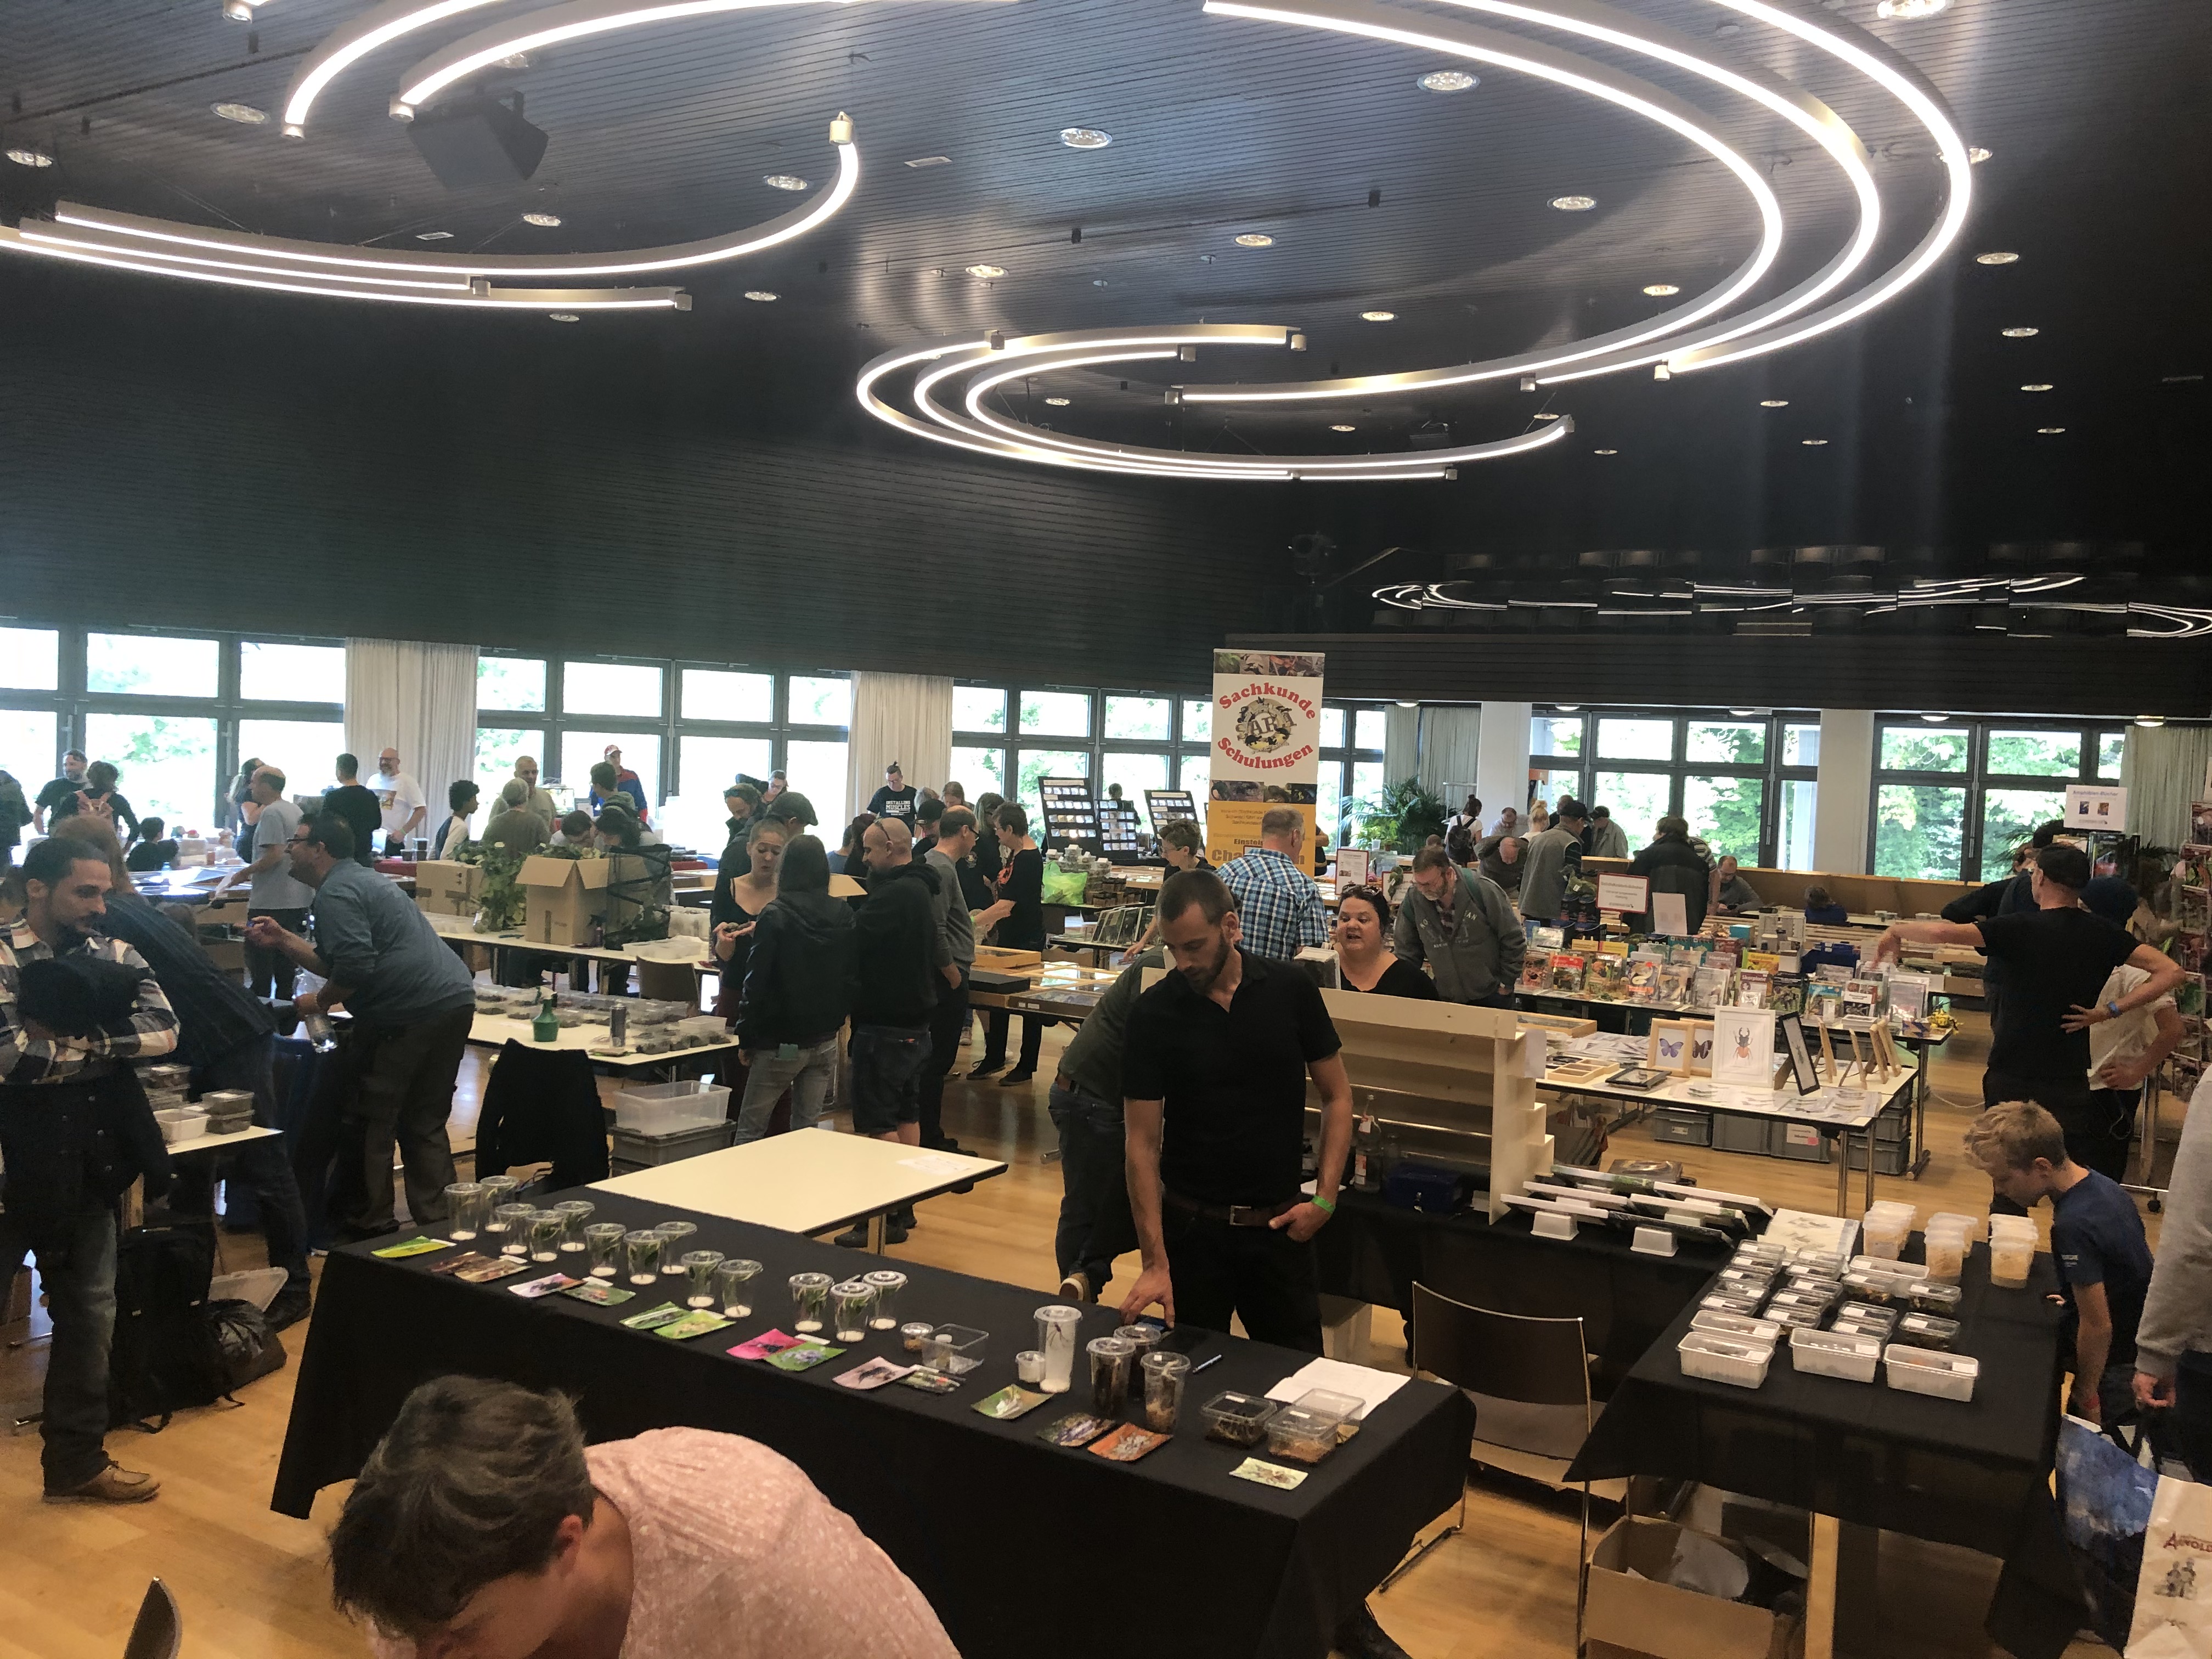 View of the insect fair in Kloten, Switzerland 2019